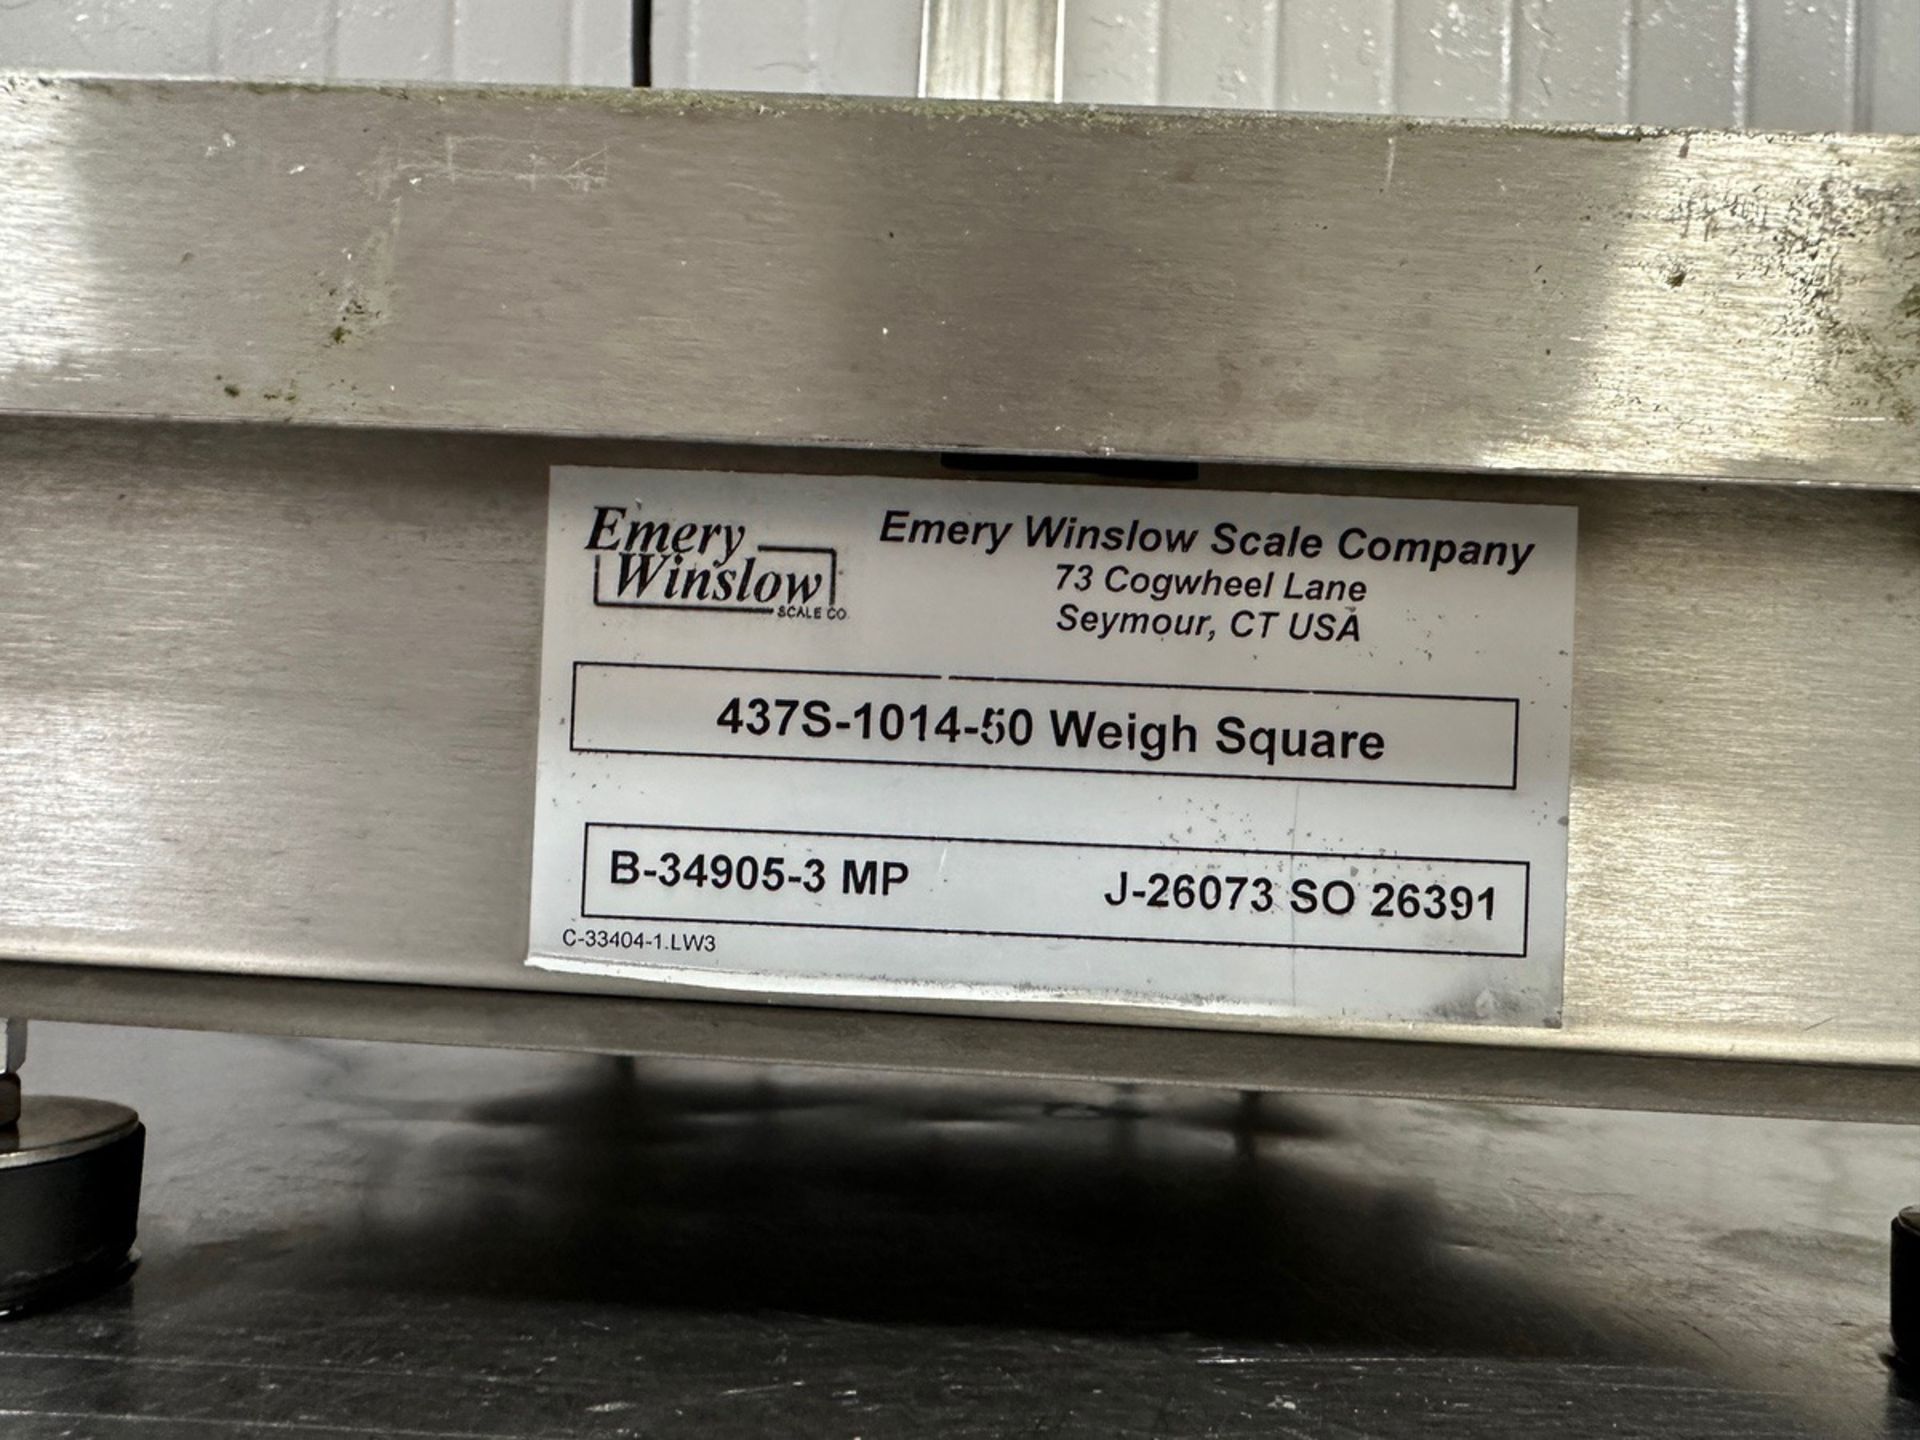 Emery Winslow Stainless Bench Top Scale, Model 7400E, 18"x18", 437S-1014-50 Weigh S | Rig Fee $25 - Image 2 of 3